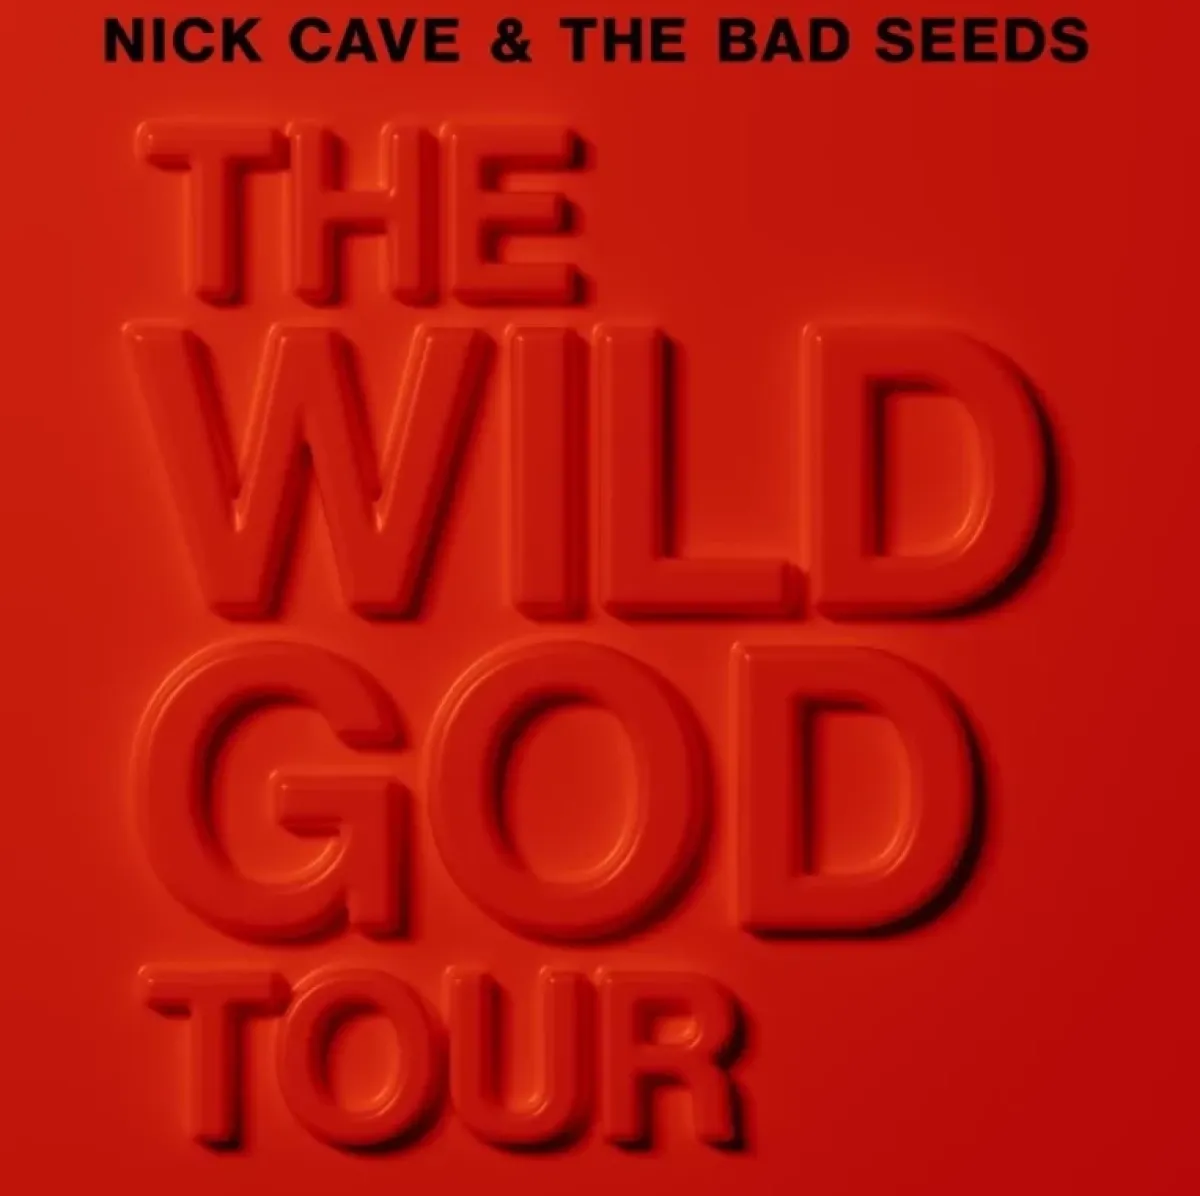 Nick Cave And The Bad Seeds at Utilita Arena Cardiff Tickets